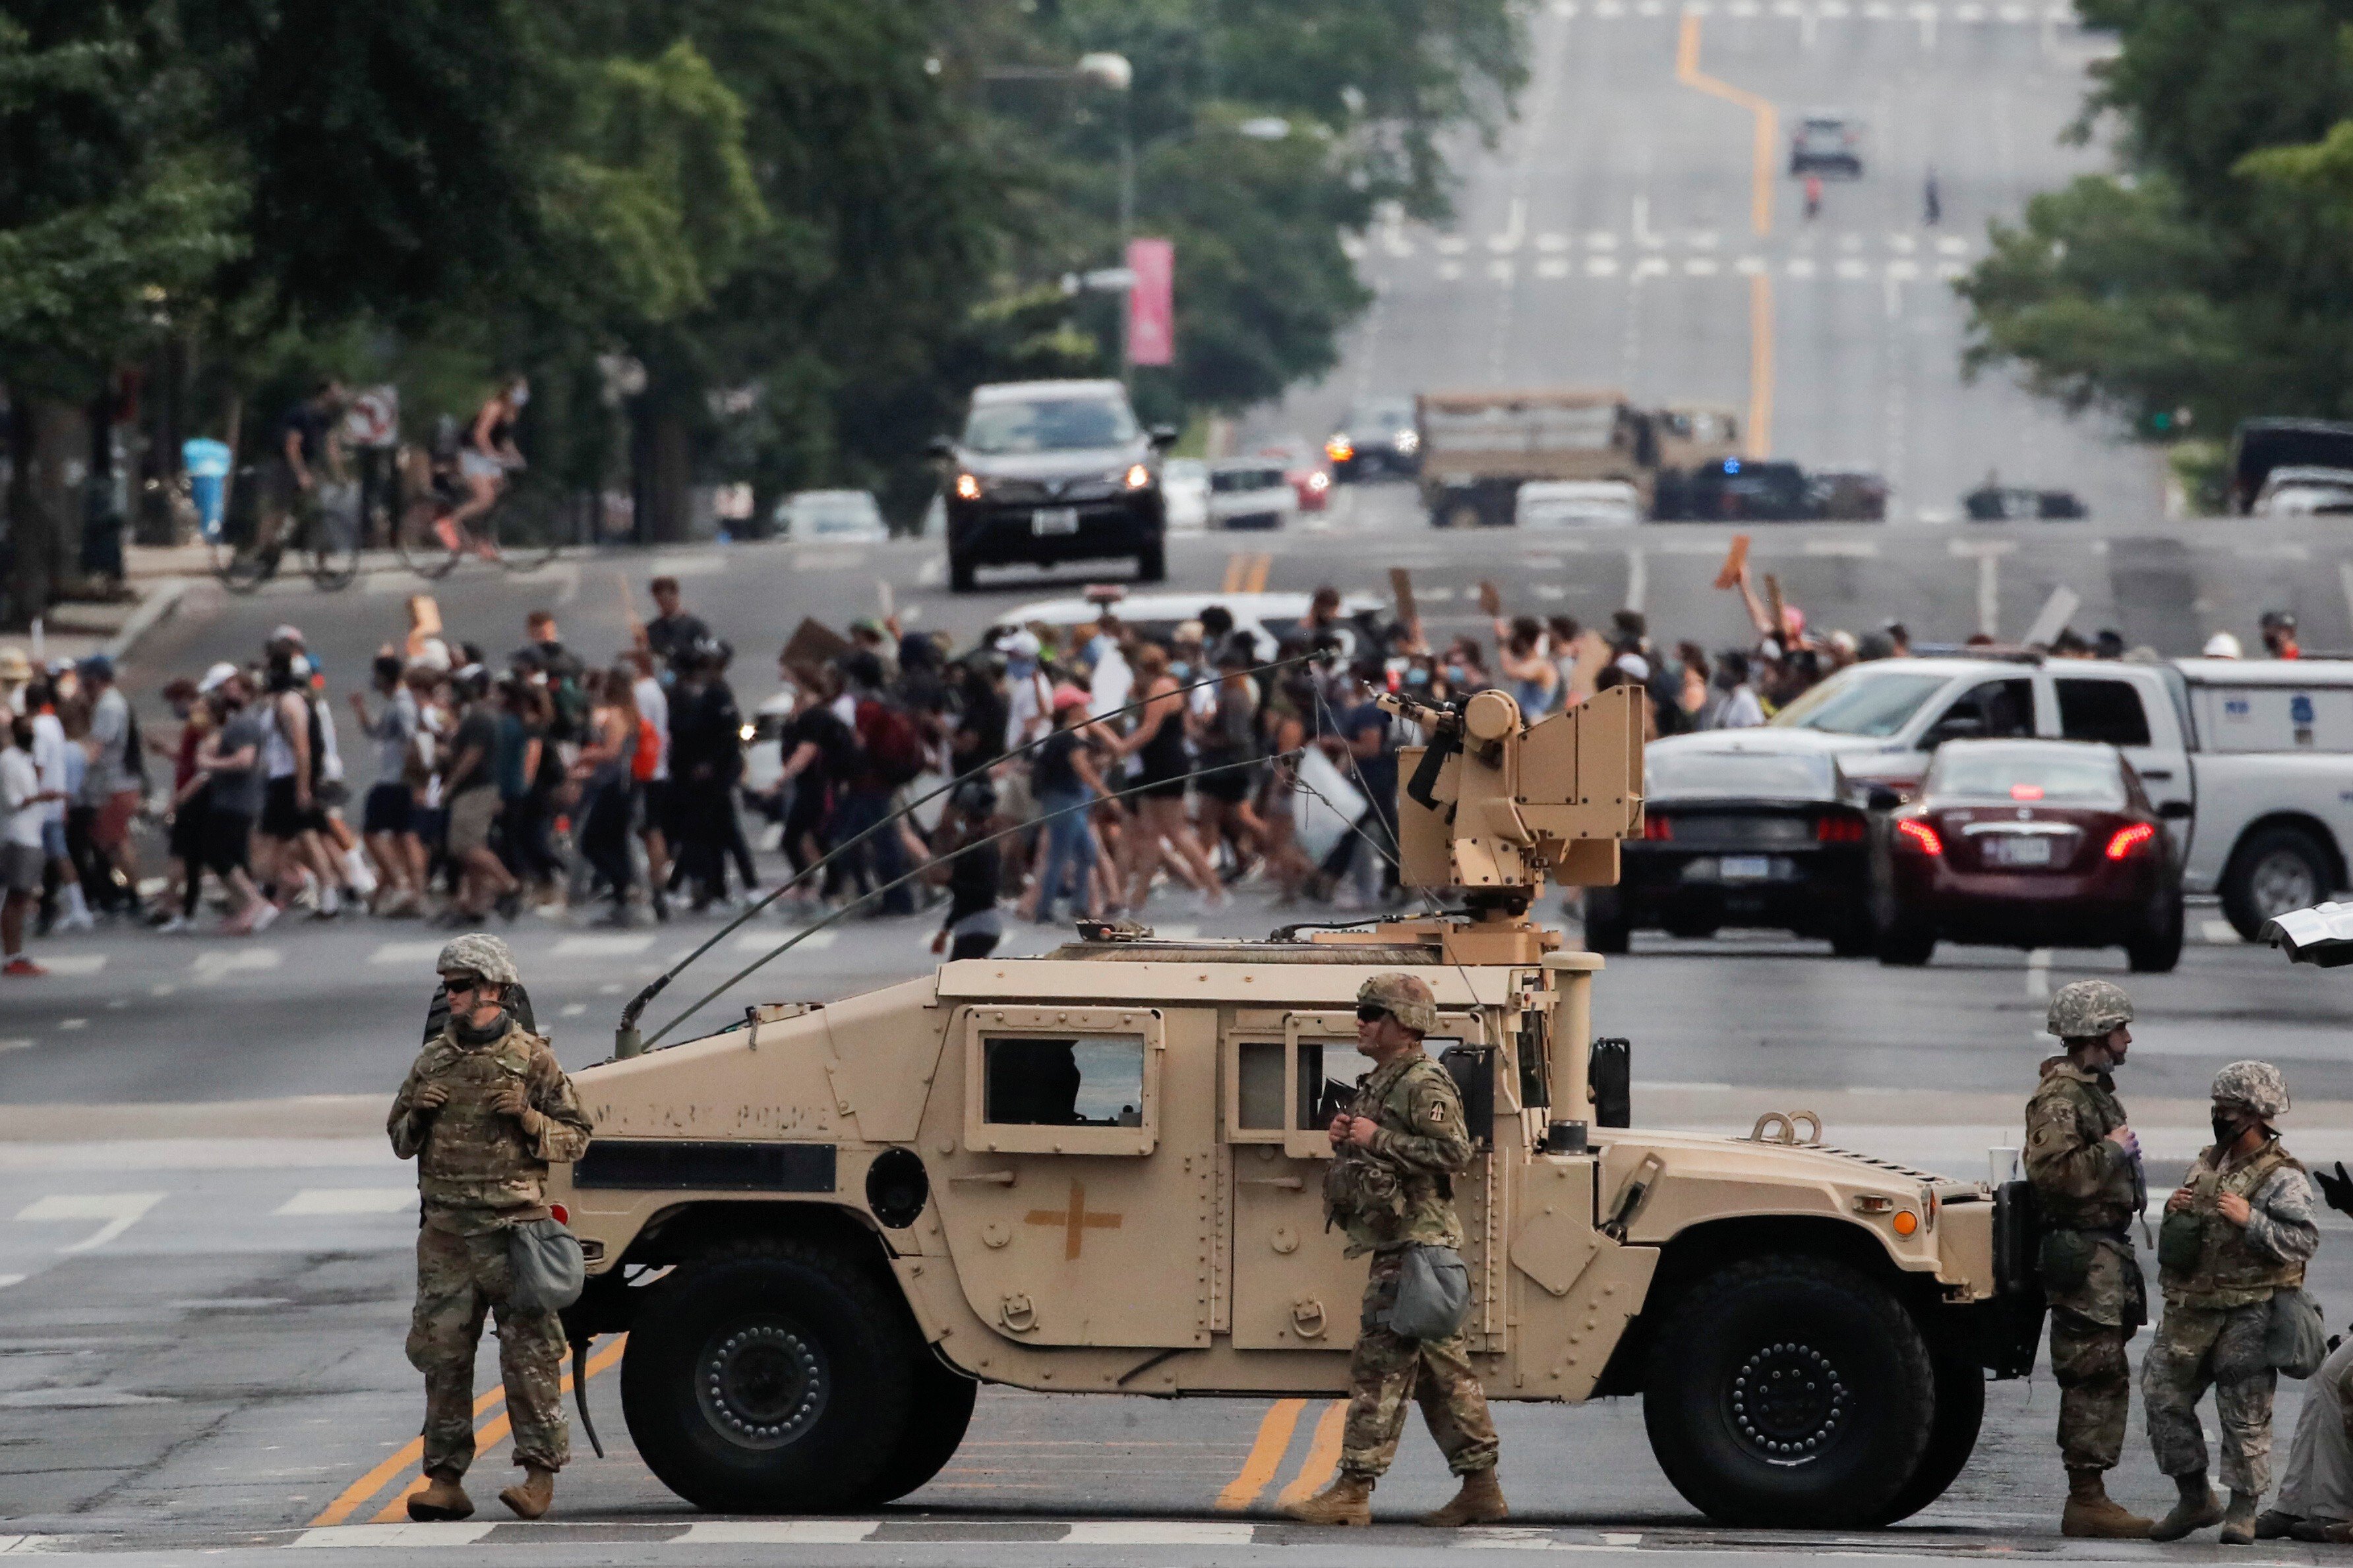 National Guard members near the White House in Washington on Wednesday. Photo: Reuters